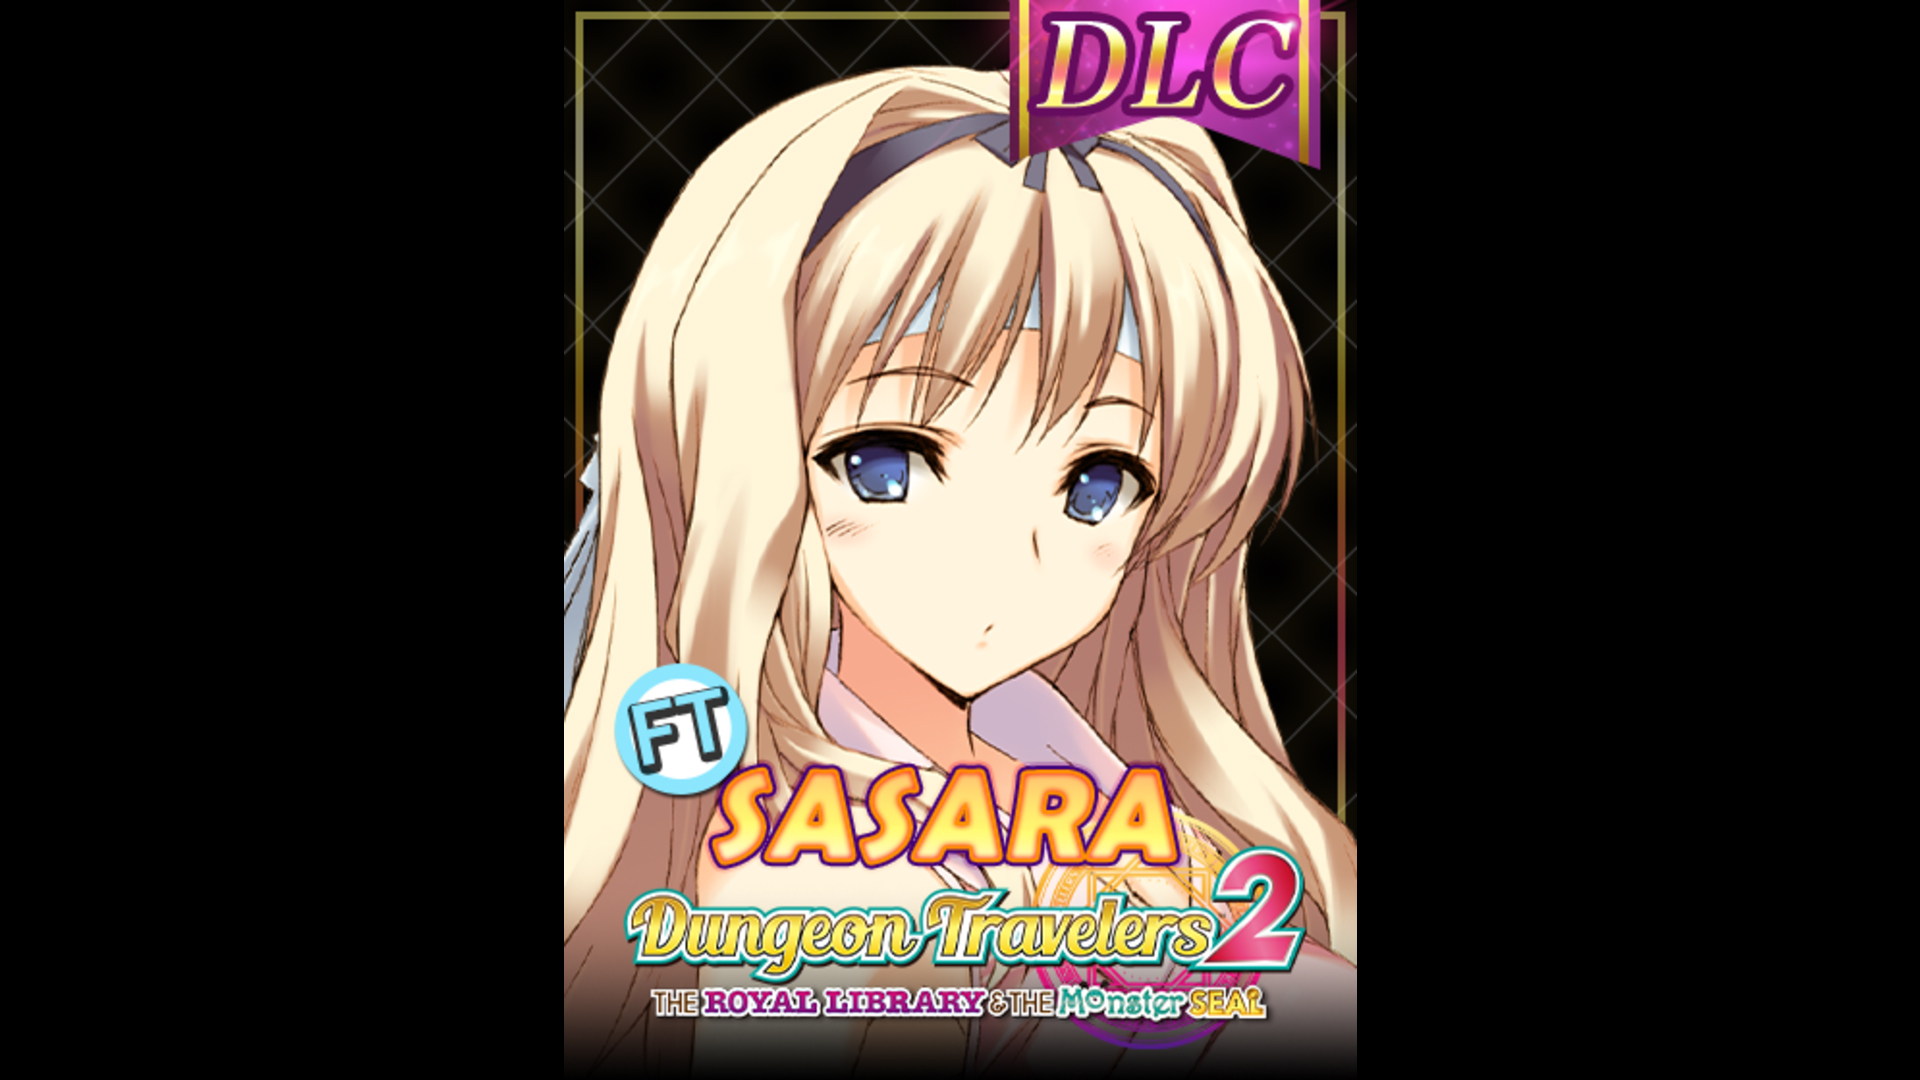 DLC - To Heart 2 Character: Fighter Sasara (Dungeon Travelers 2) - RPG - 1